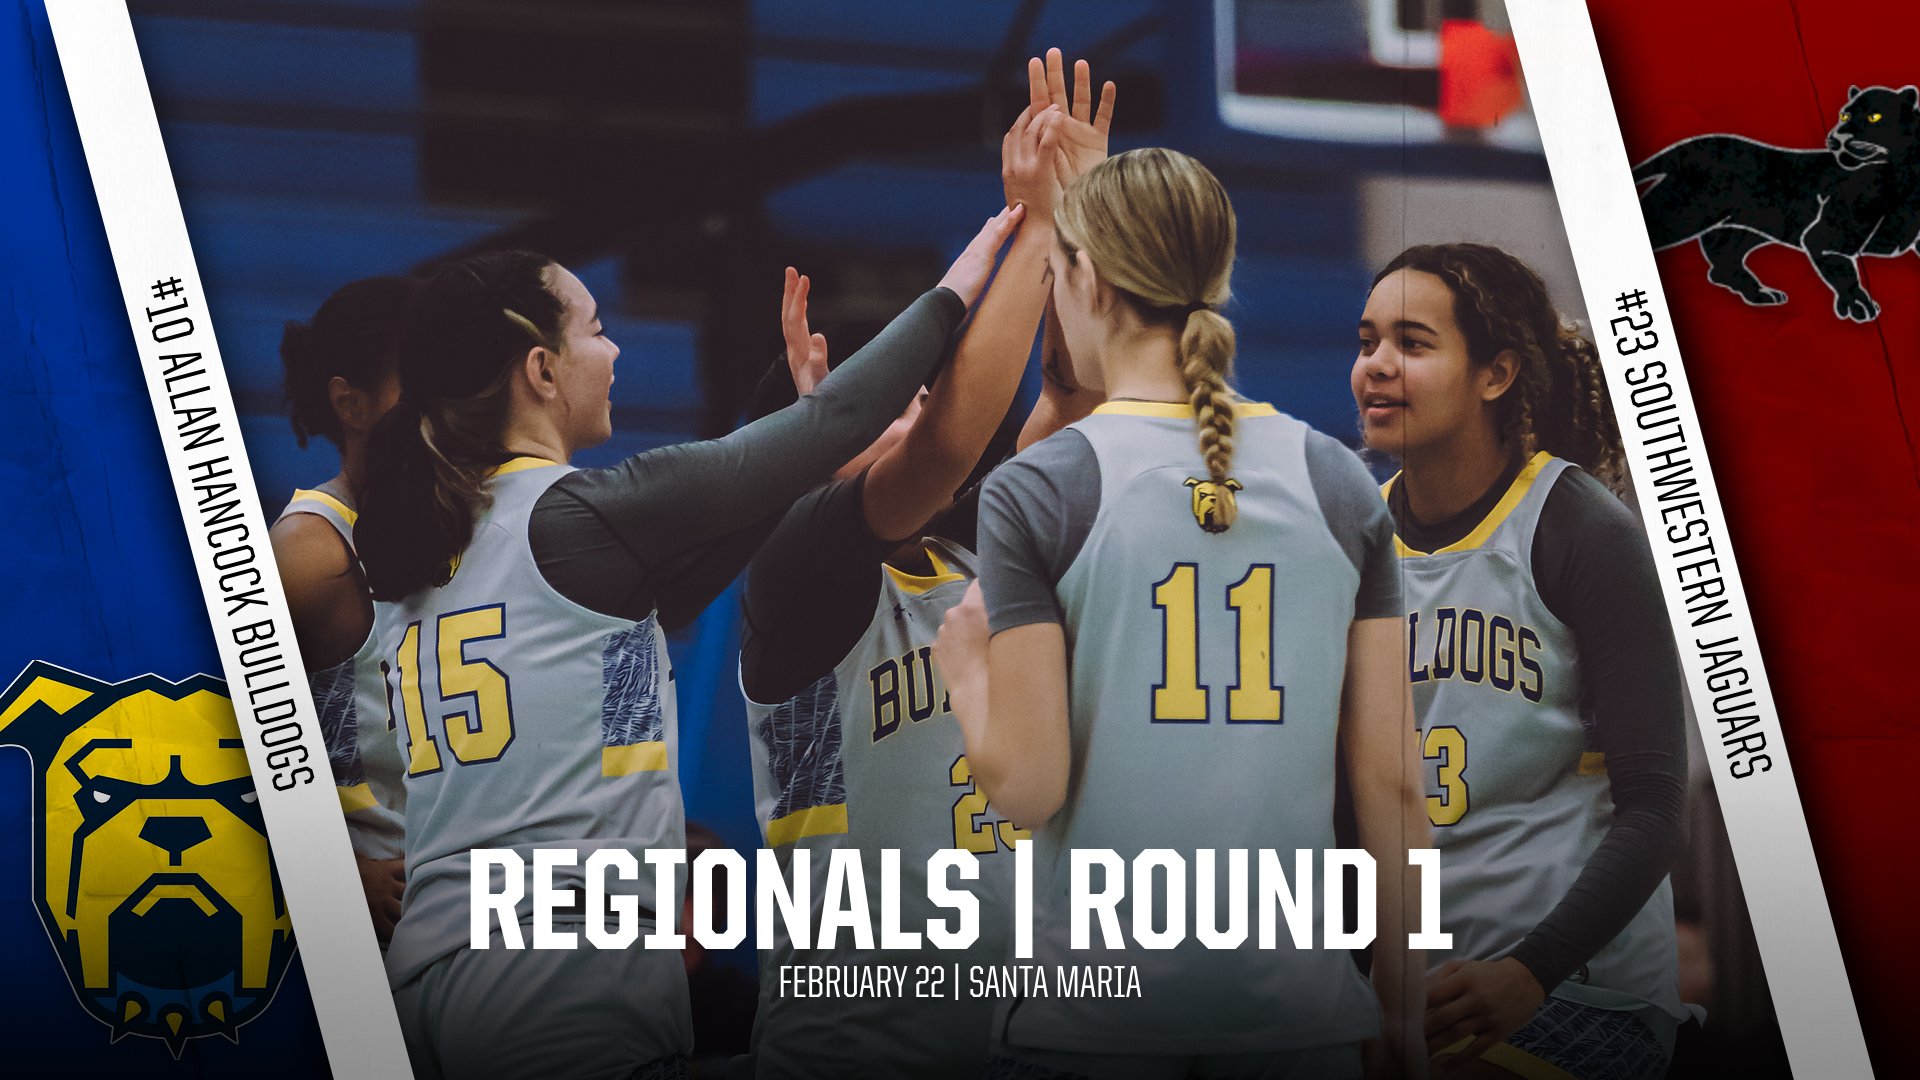 Women's Basketball Snags Milestone Win Over Ventura, Tabbed as No. 10 Seed in SoCal Regional Tournament